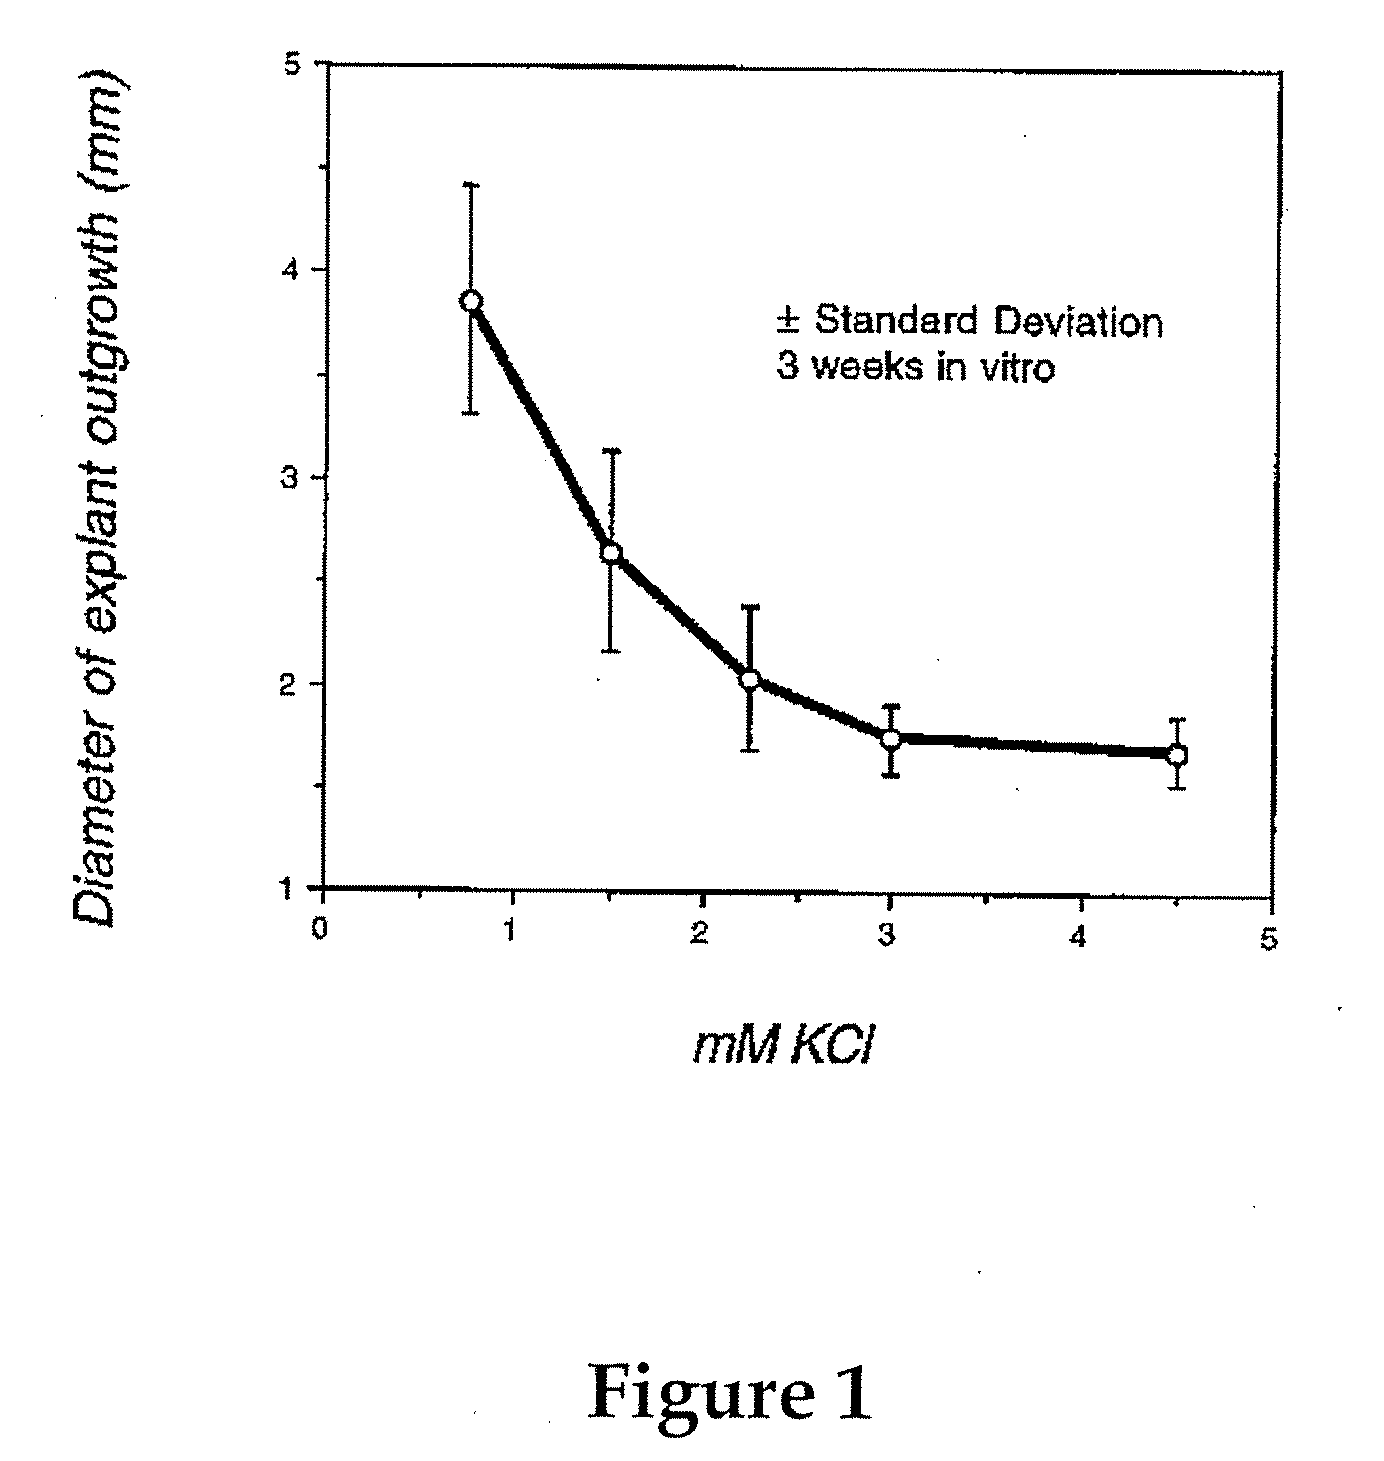 Methods for in vitro growth of hair follicles